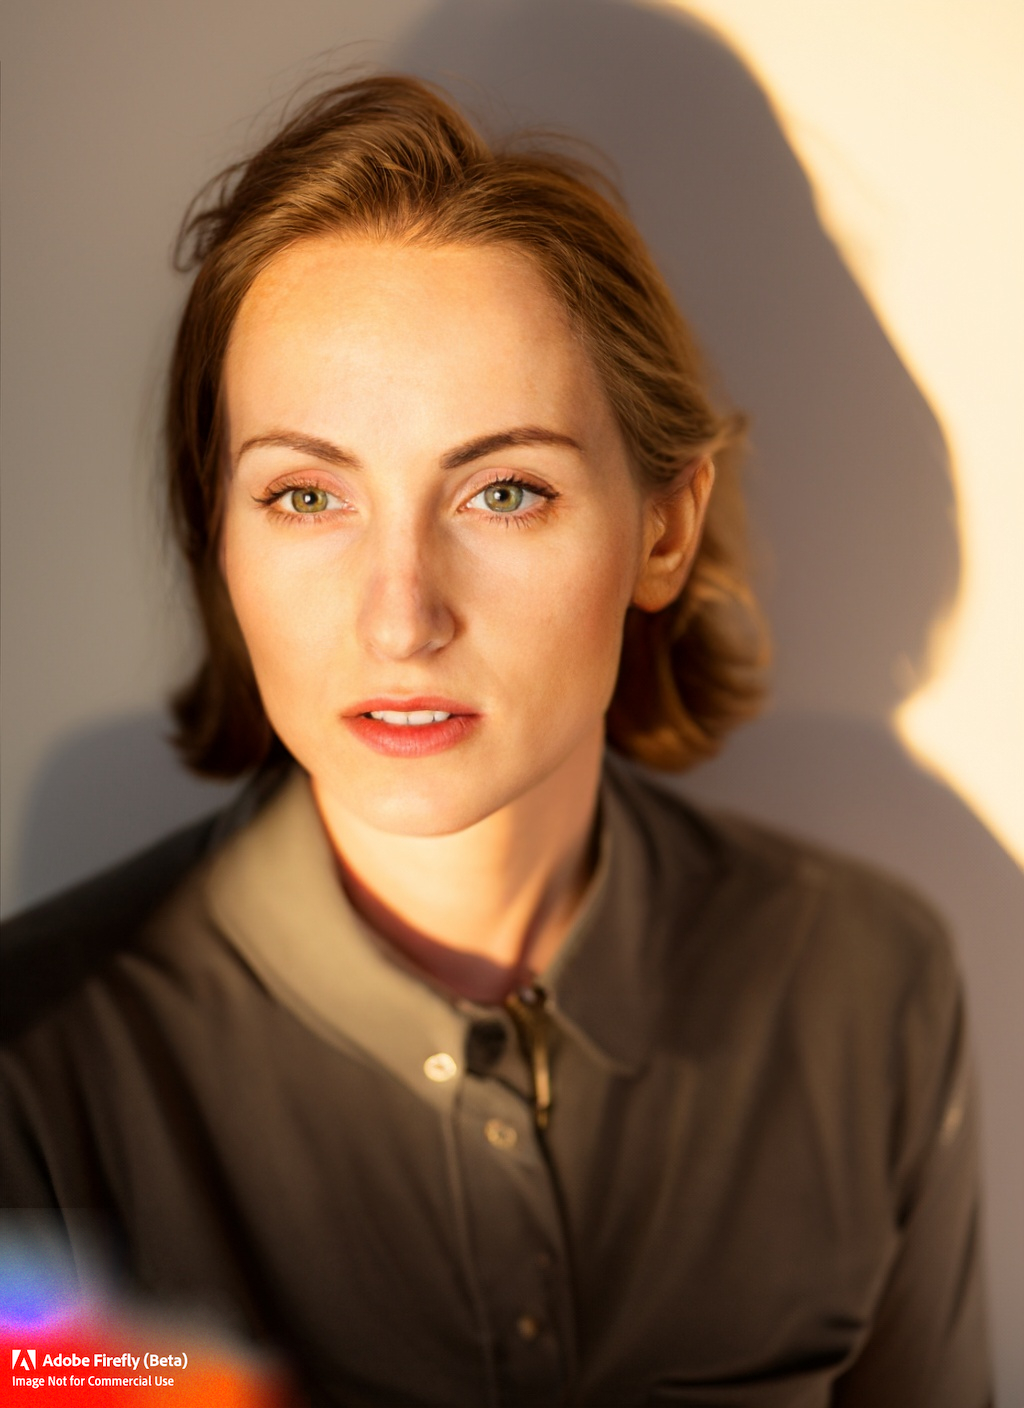 Firefly_a+photo of woman headshot, with sun light, by peter hurley, style1_78830